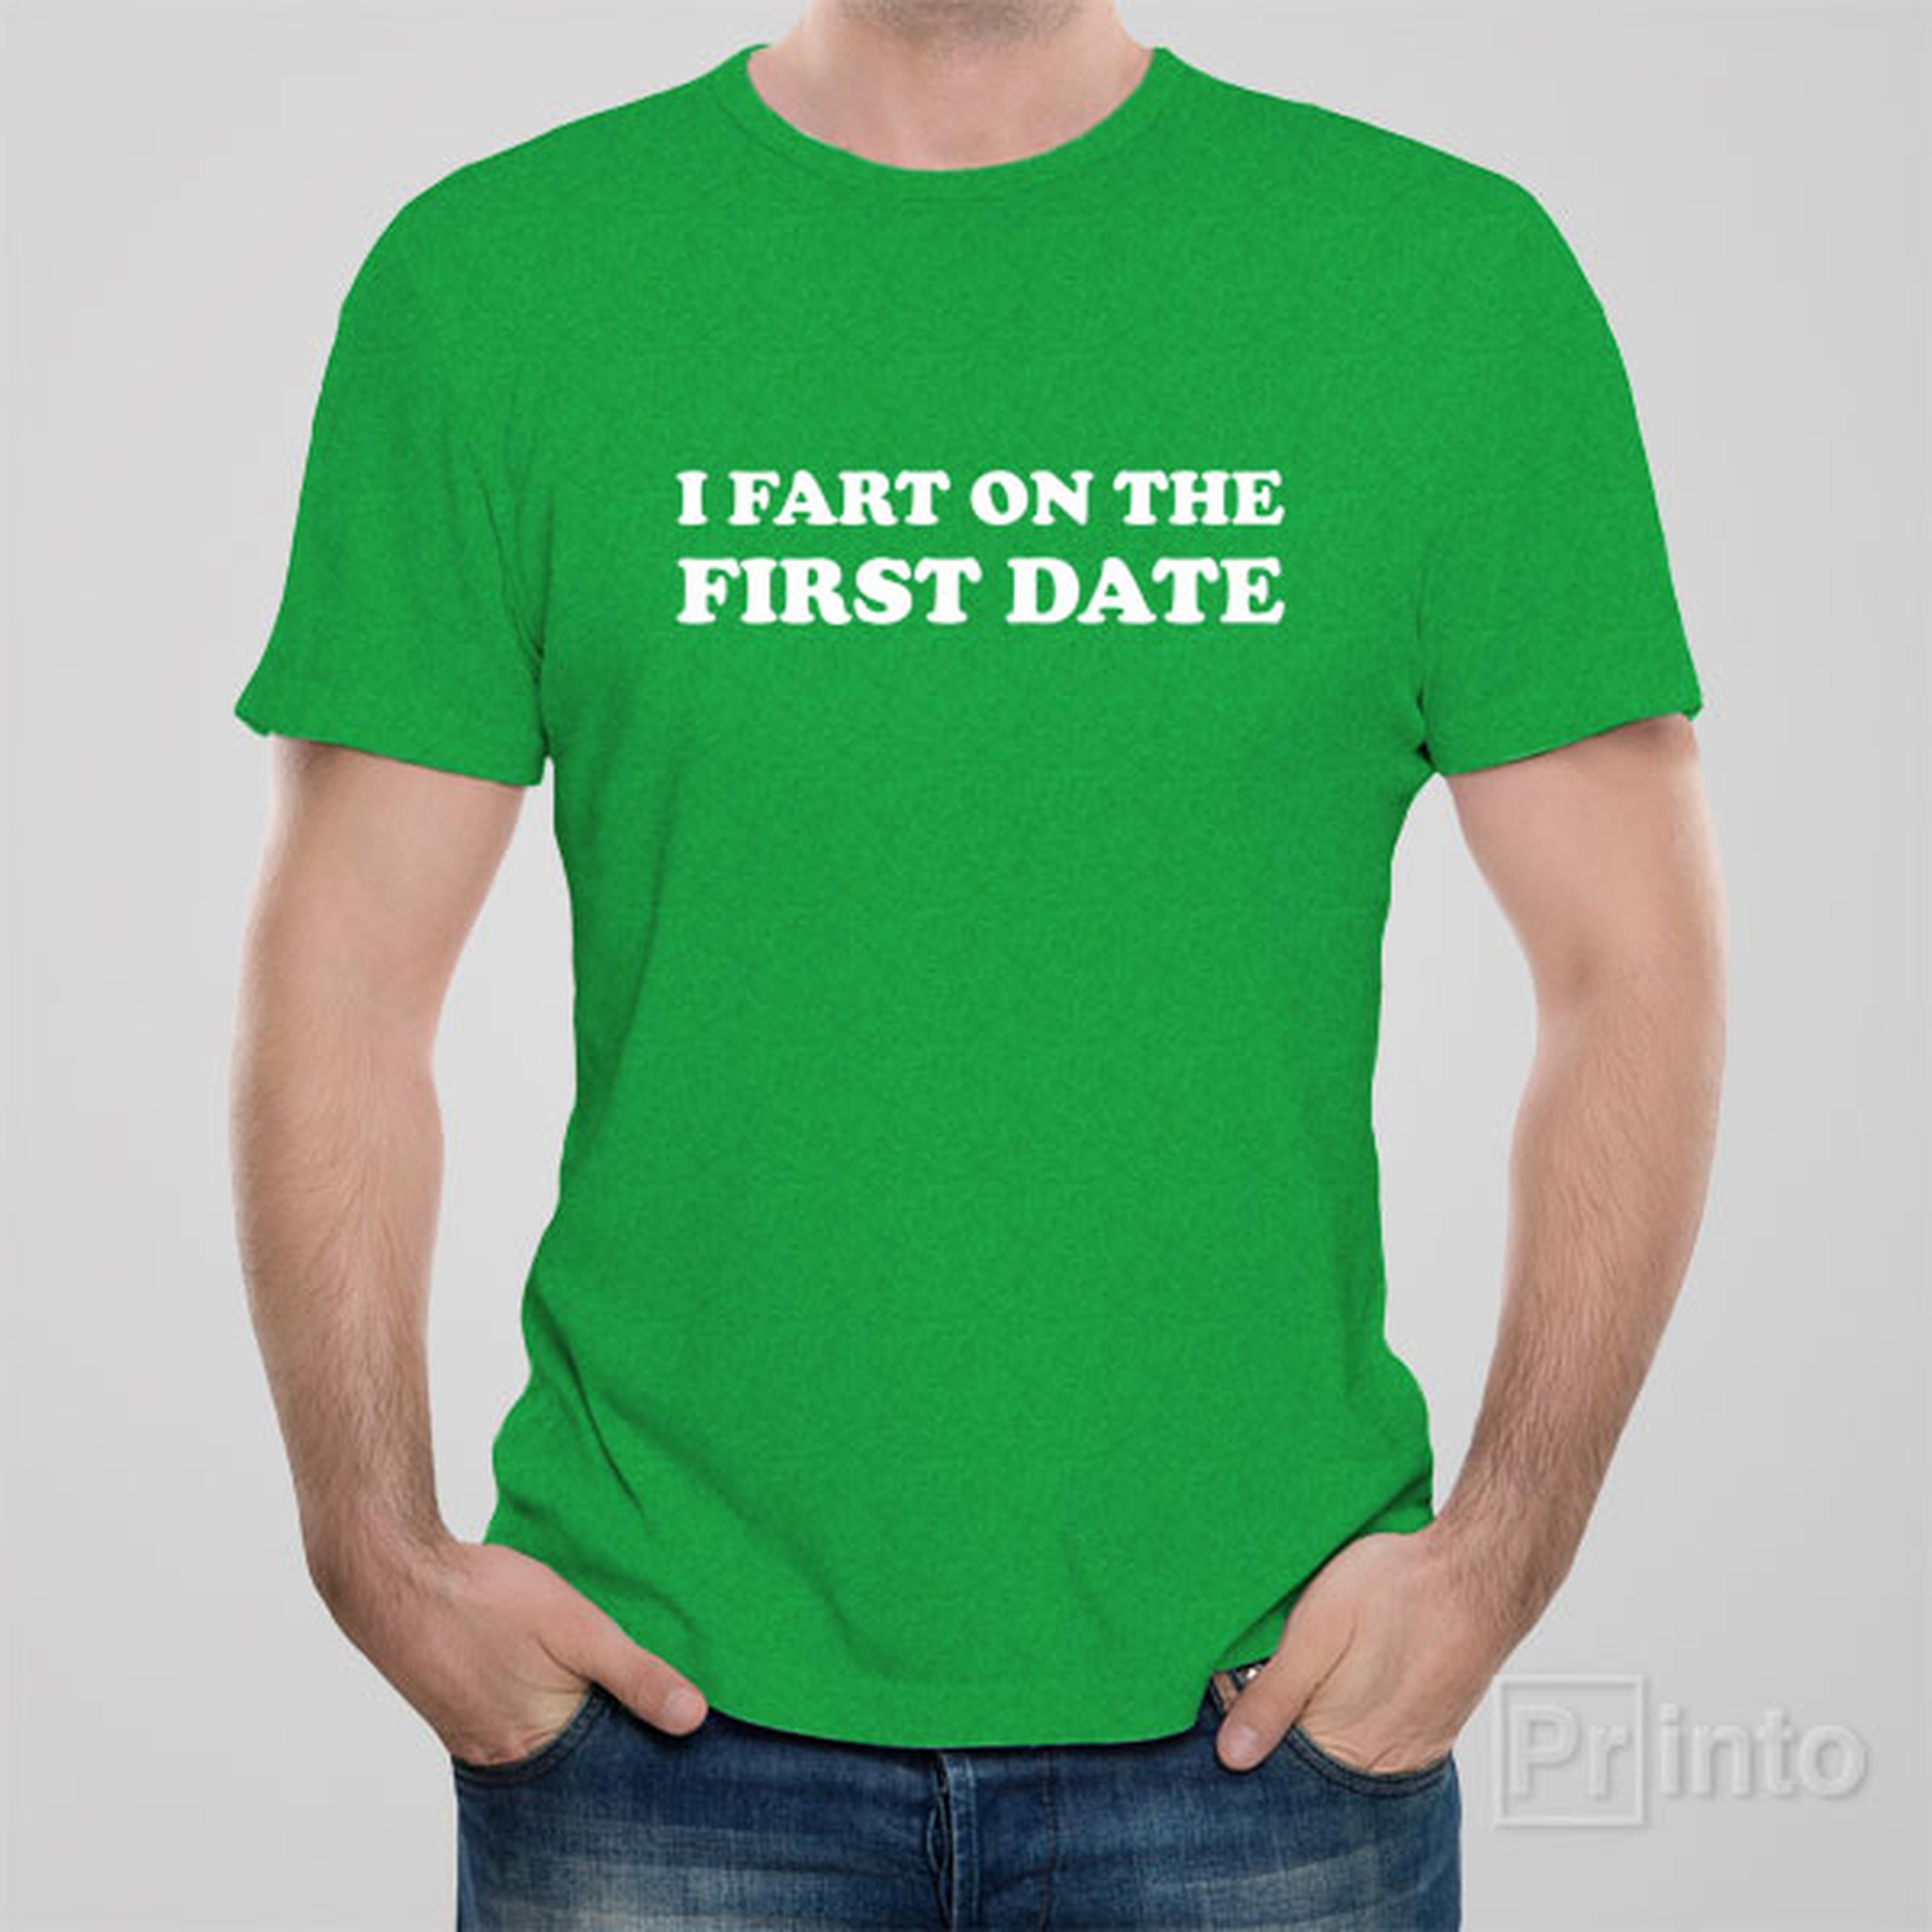 i-fart-on-the-first-date-t-shirt